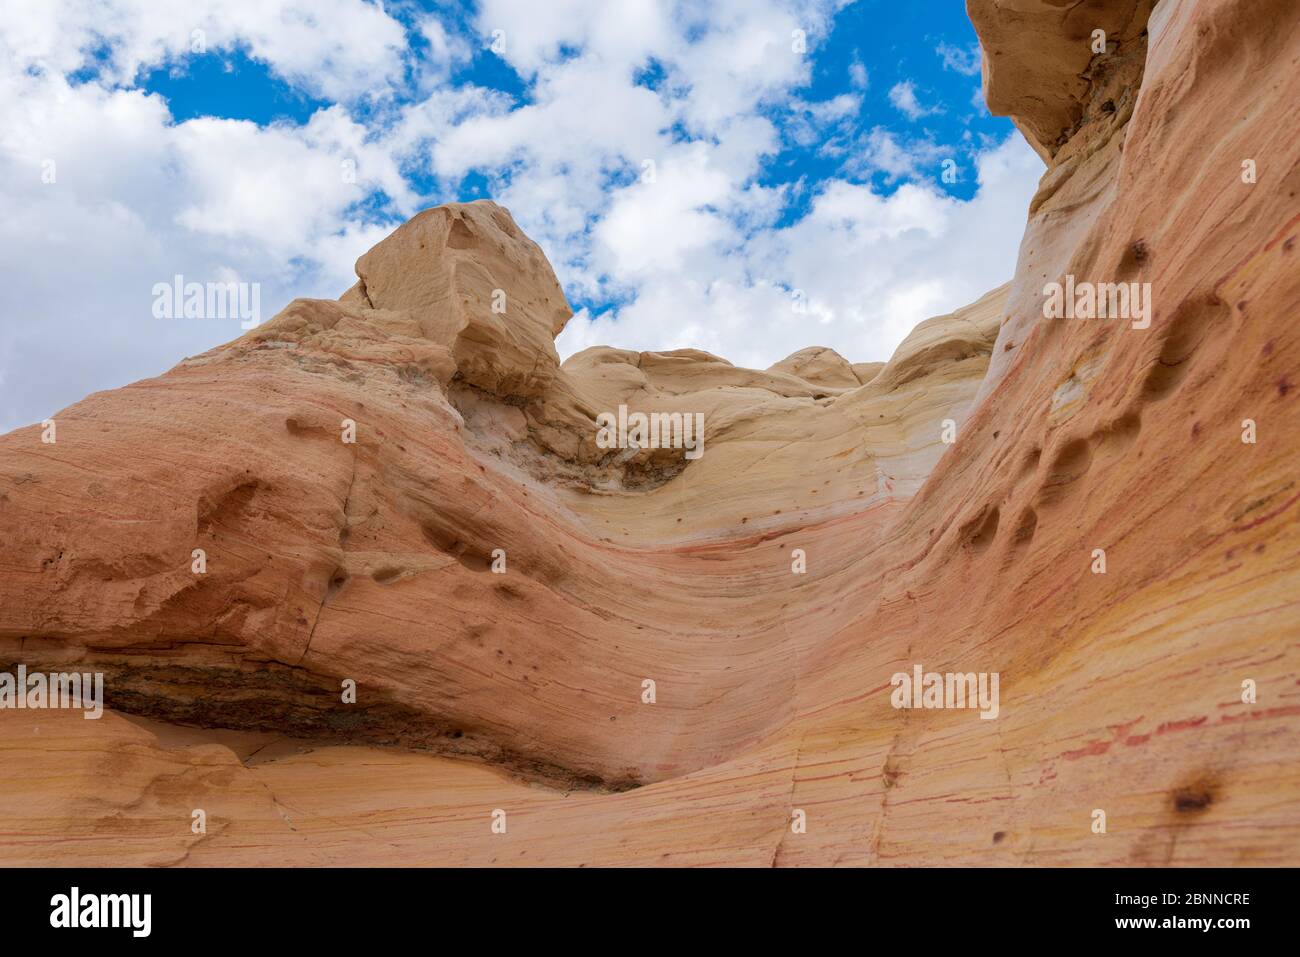 Landscape of striped conical rock formations in New Mexico Stock Photo